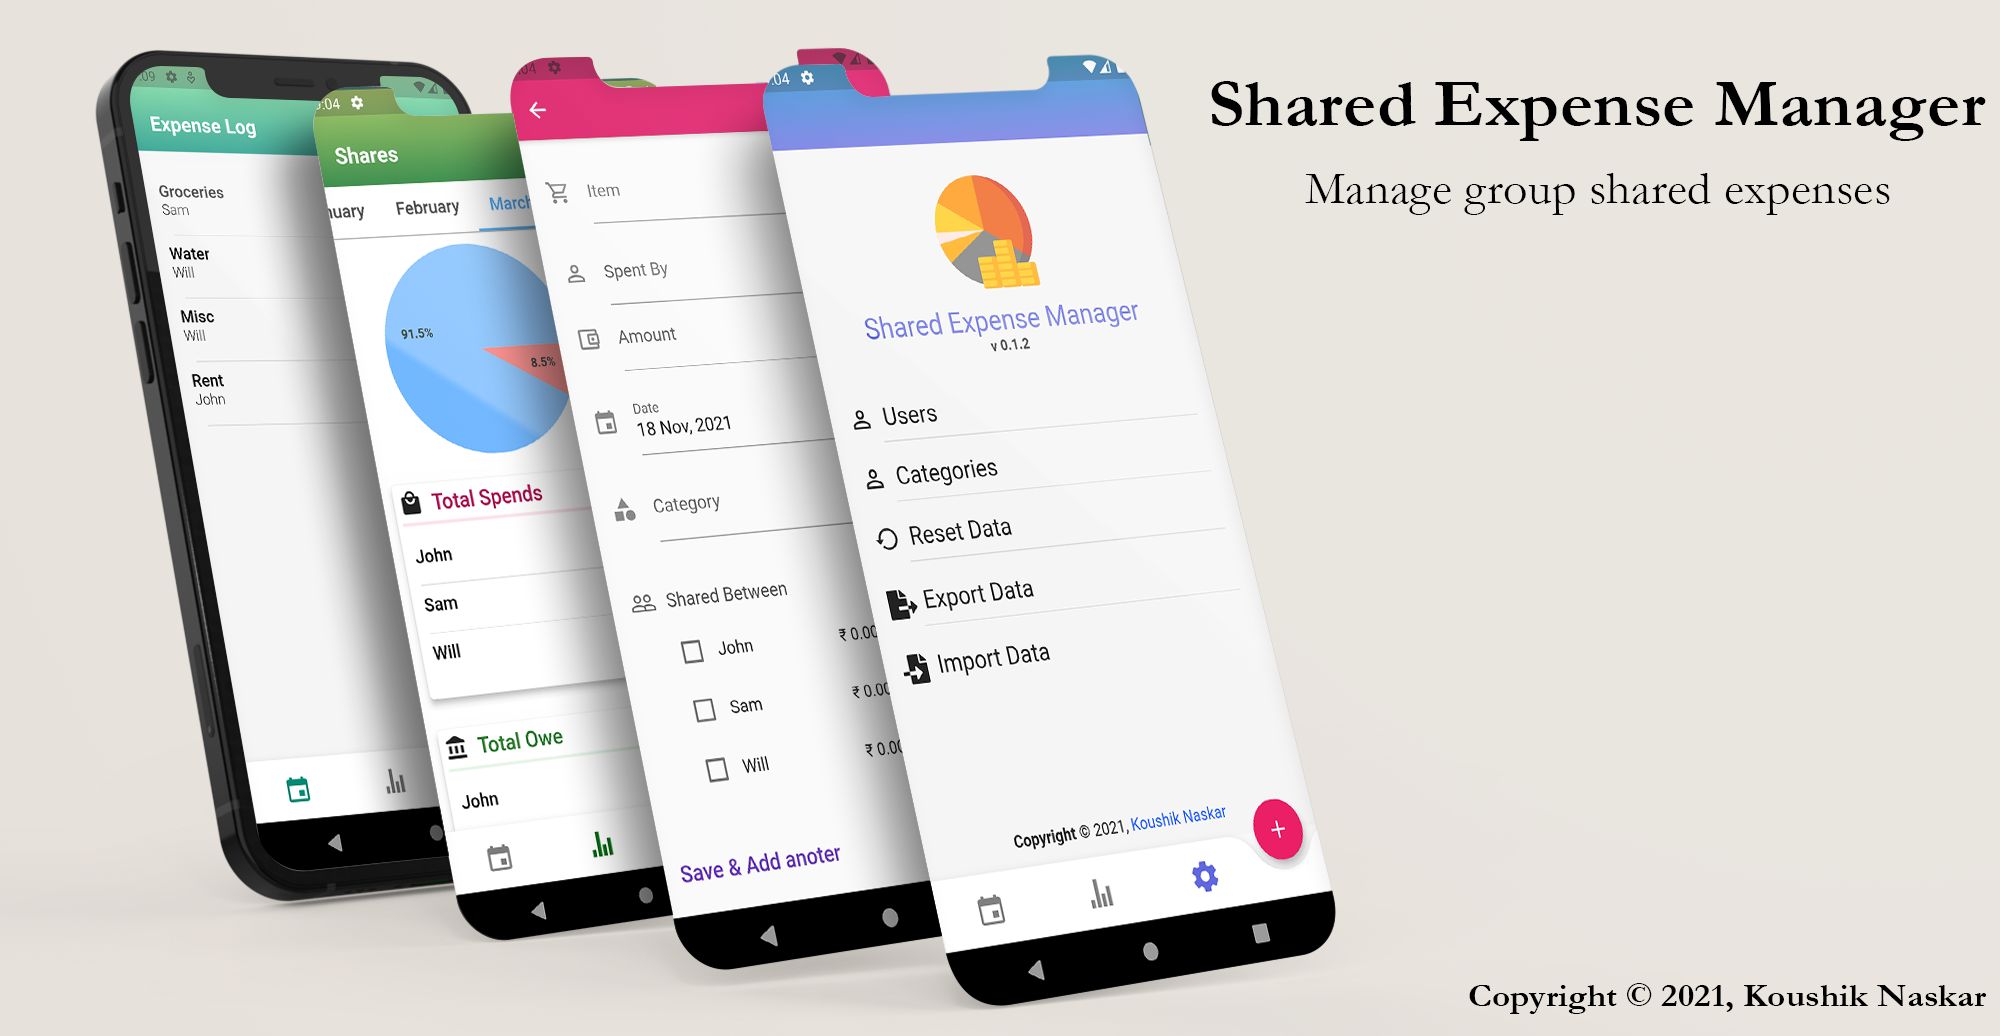 Shared Expense Manager